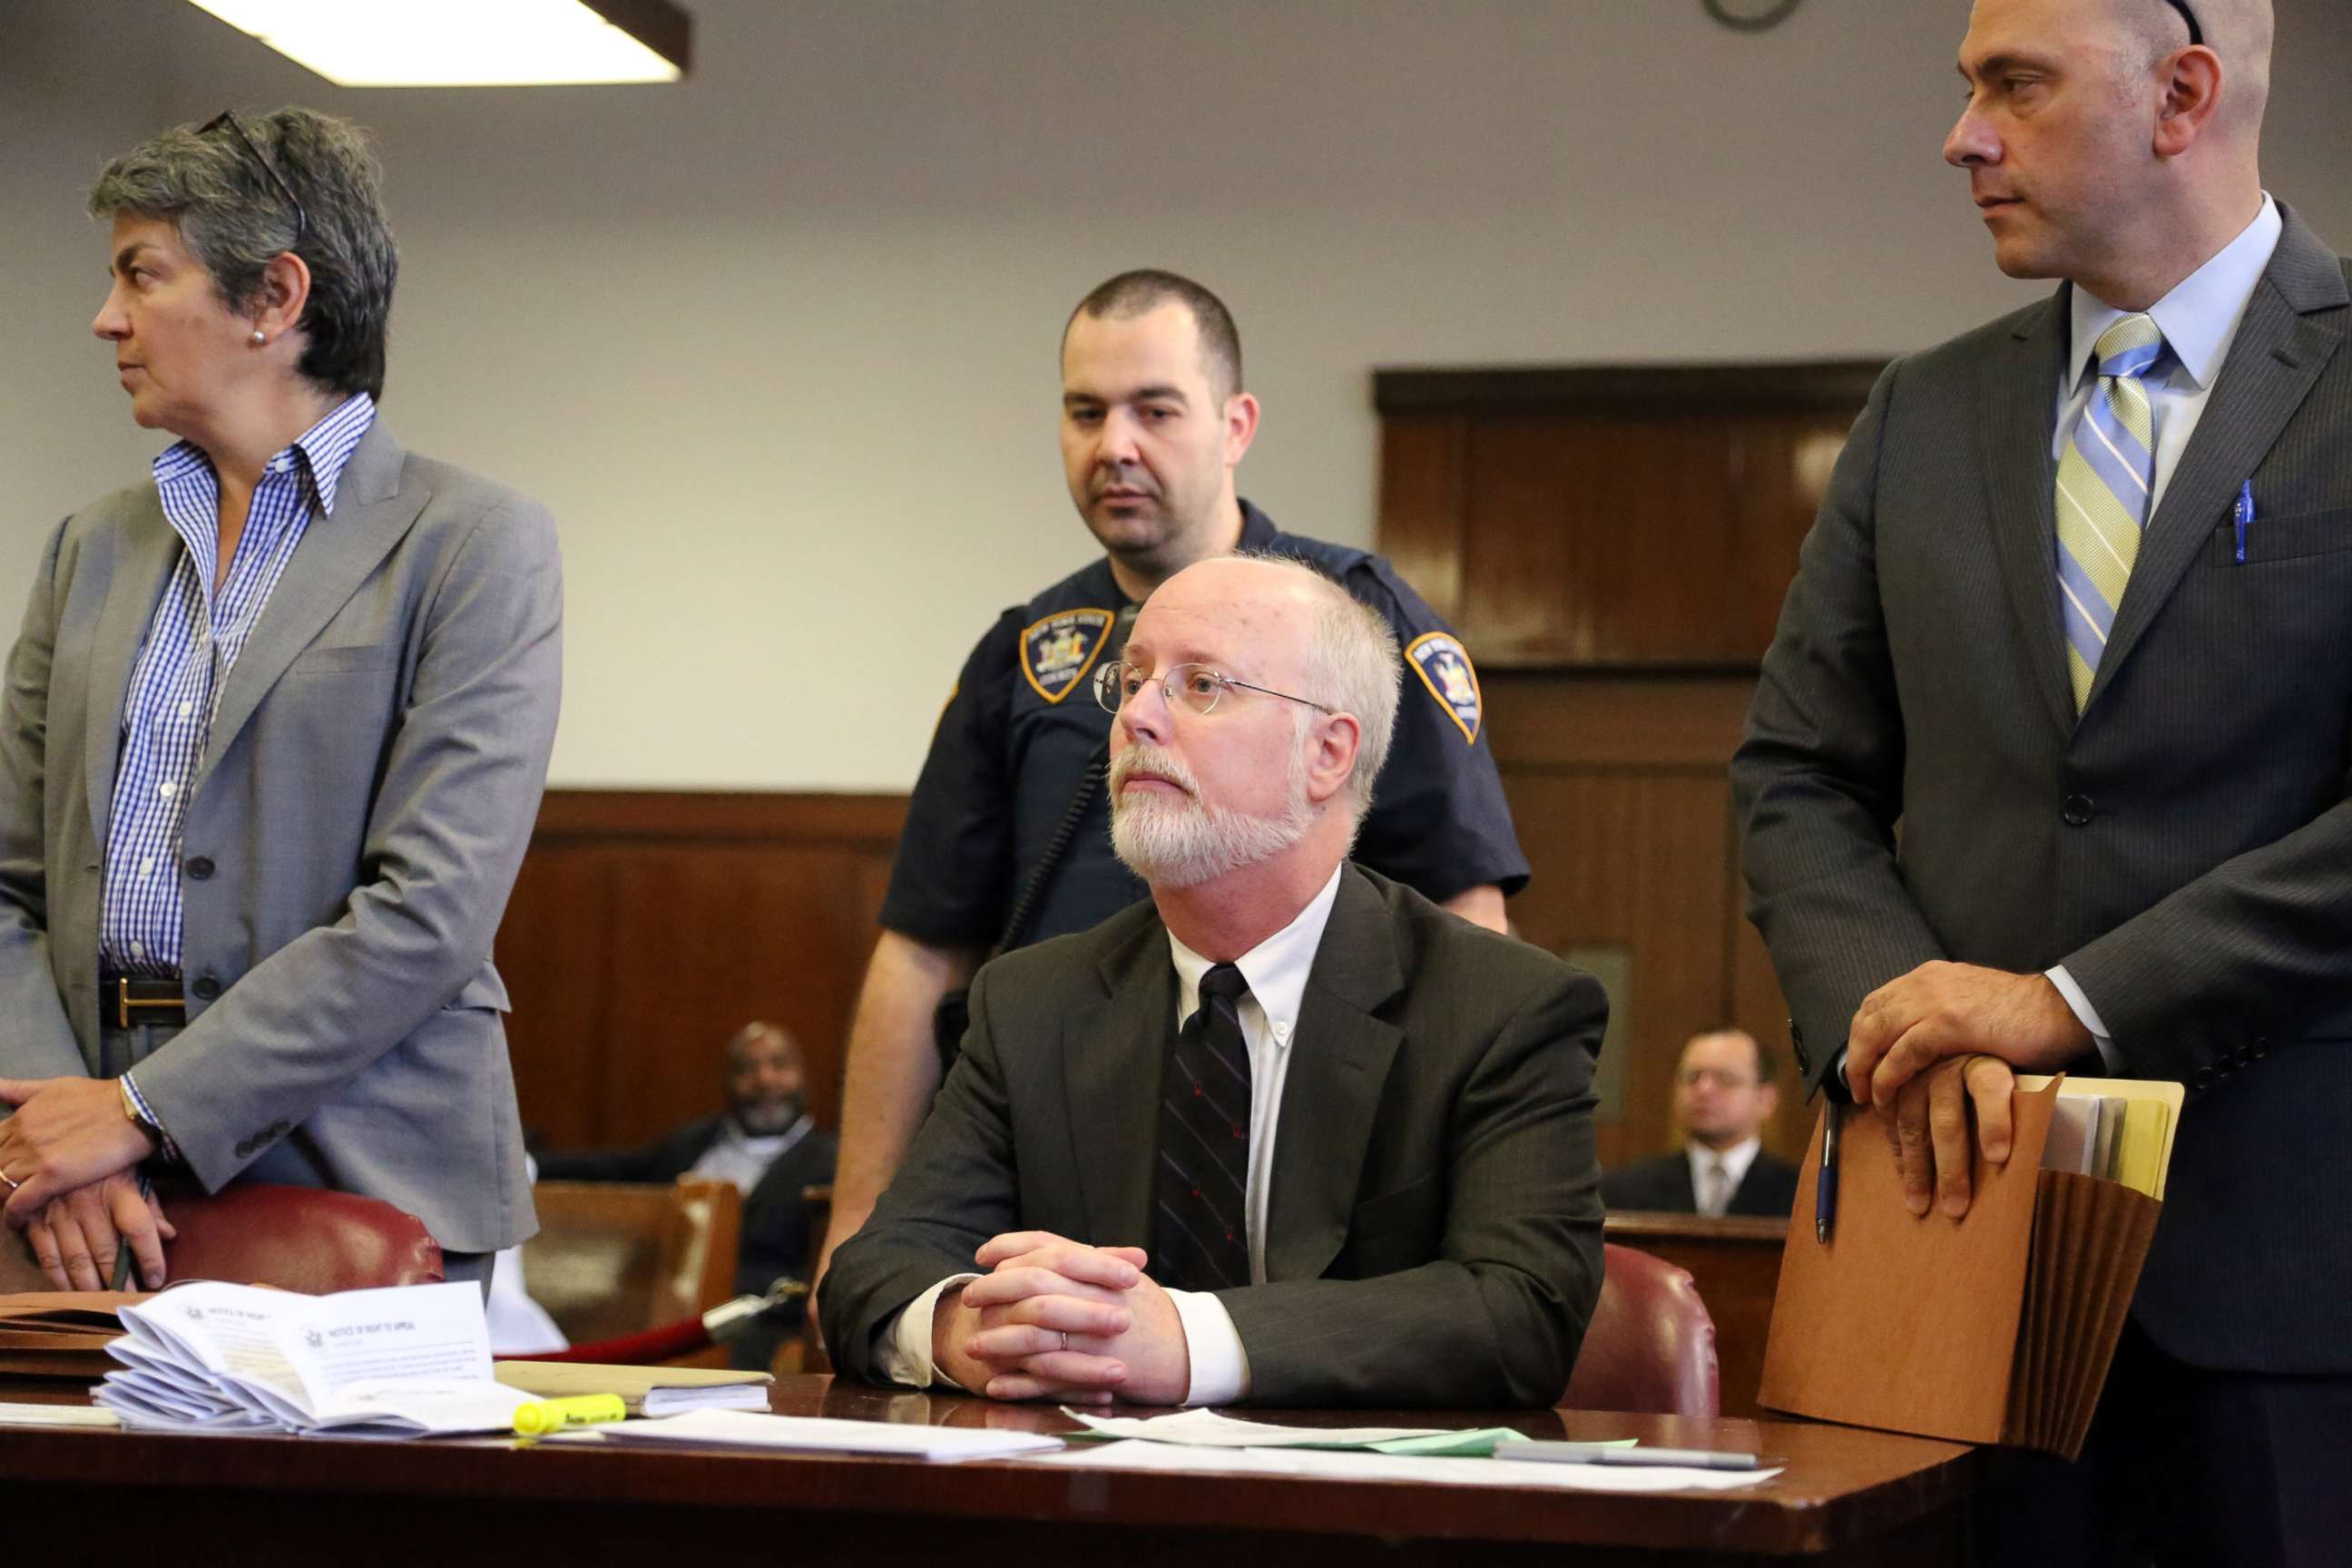 PHOTO: In this Sept. 4, 2014, file photo, Dr. Robert Hadden appears in Manhattan Supreme Court in New York.